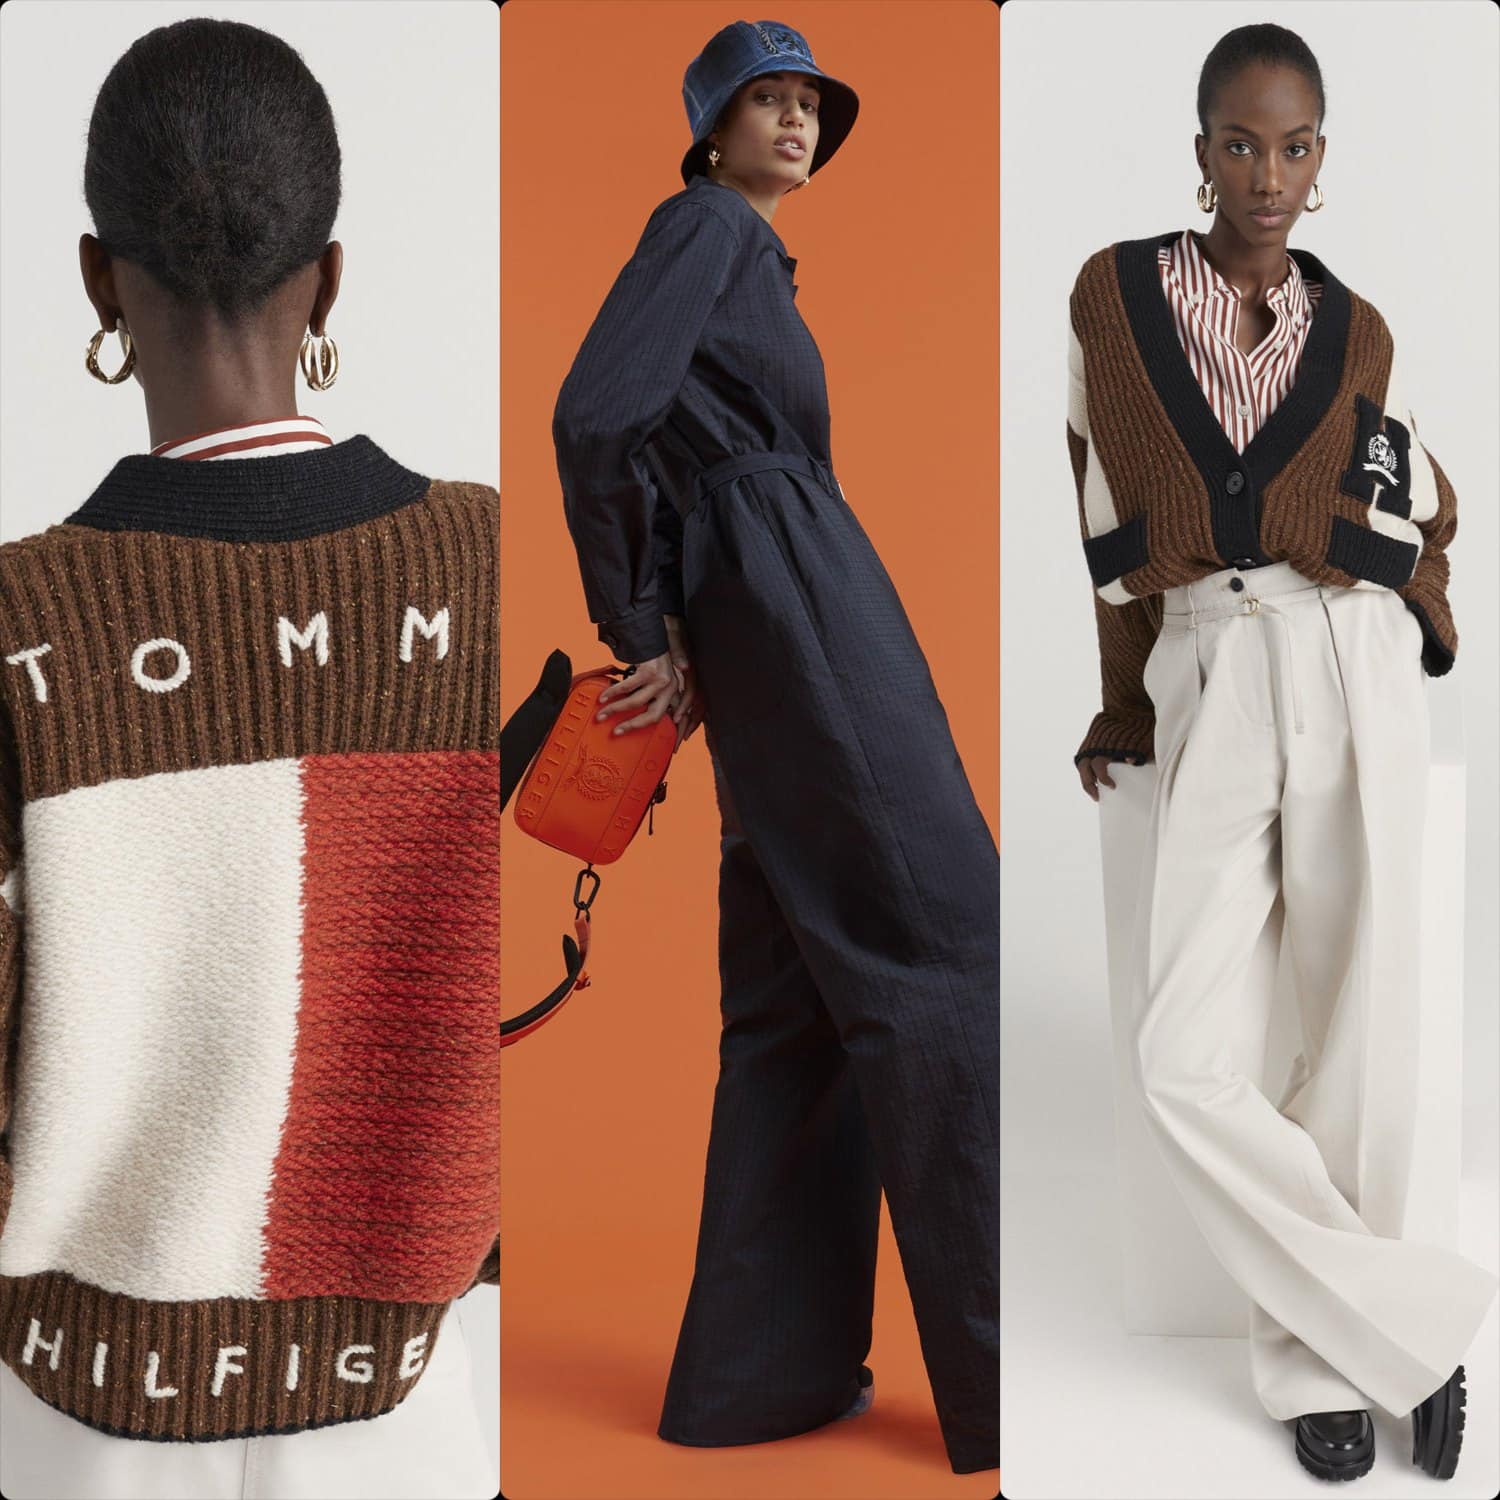 Tommy Hilfiger Fall Winter 2021-2022. RUNWAY MAGAZINE ® Collections. RUNWAY NOW / RUNWAY NEW